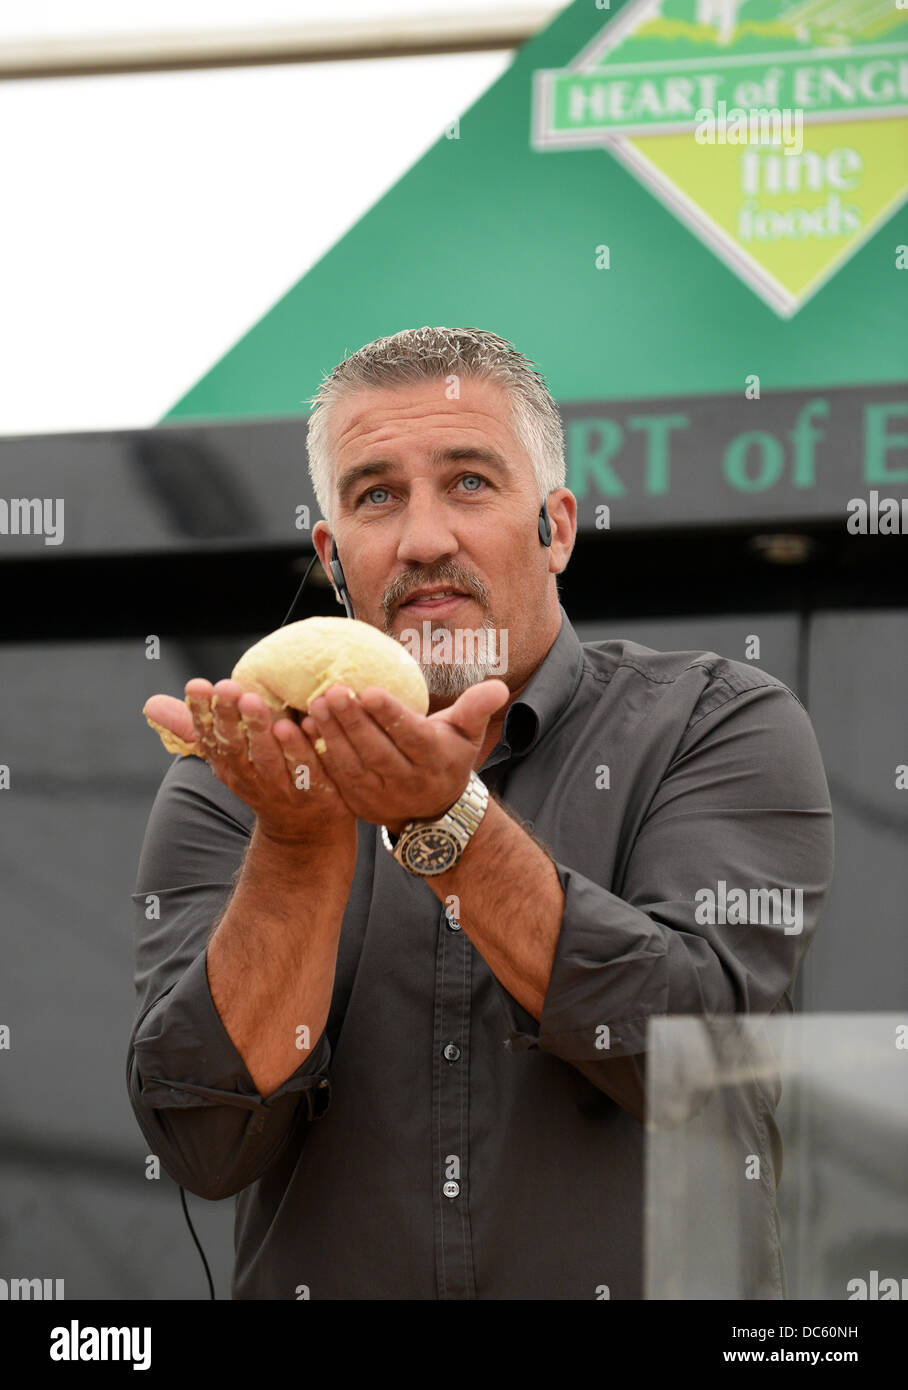 Shrewsbury Flower Show Uk 9th August 2013. Television celebrity baker Paul Hollywood demonstrating his baking. Credit:  David Bagnall/Alamy Live News Stock Photo